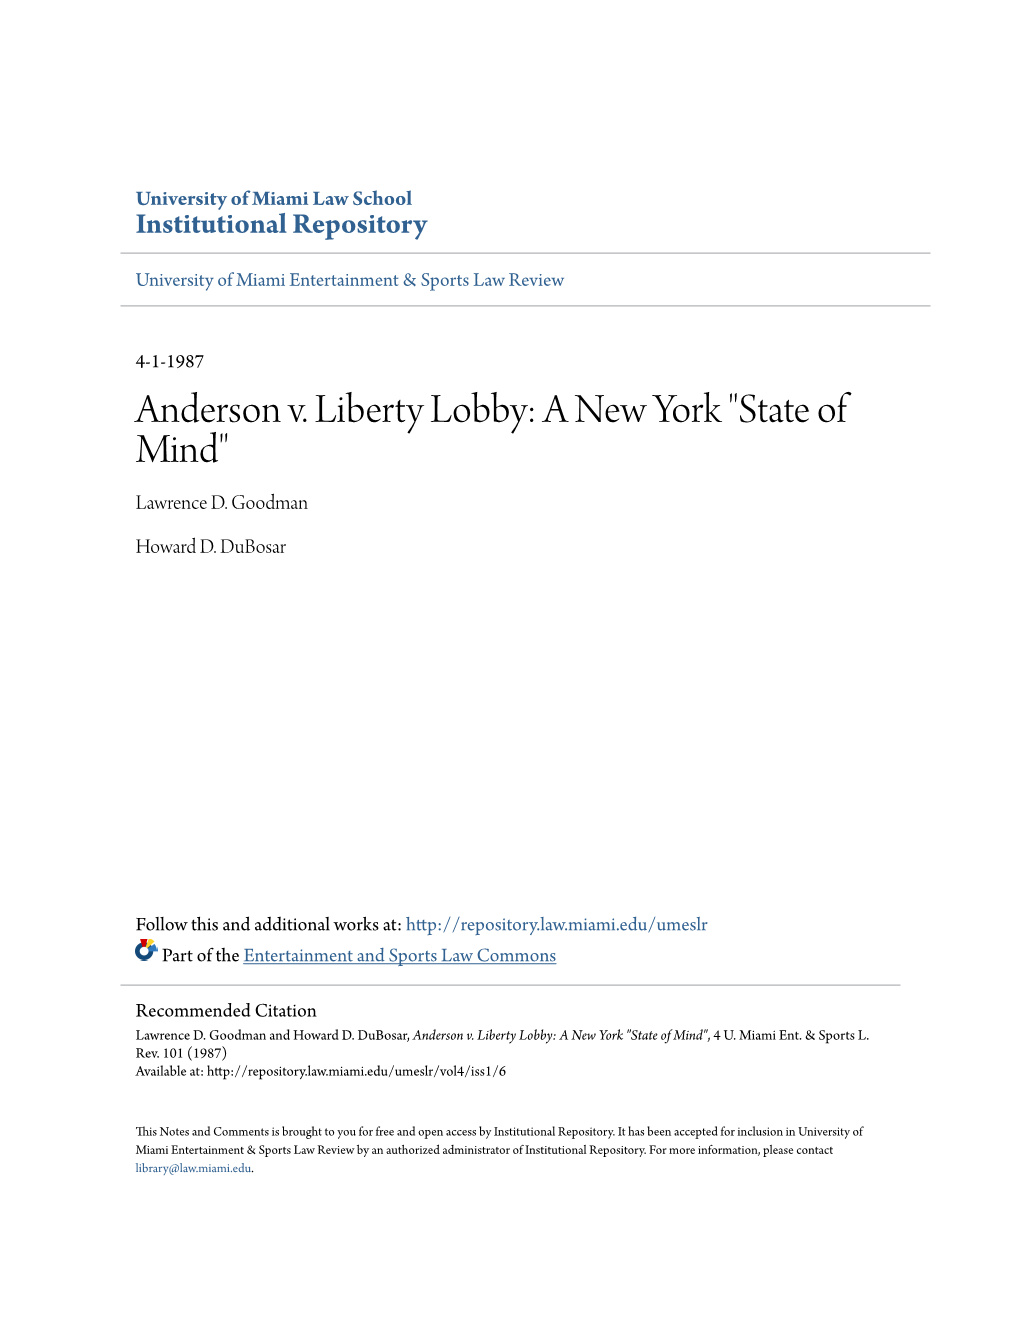 Anderson V. Liberty Lobby: a New York "State of Mind" Lawrence D